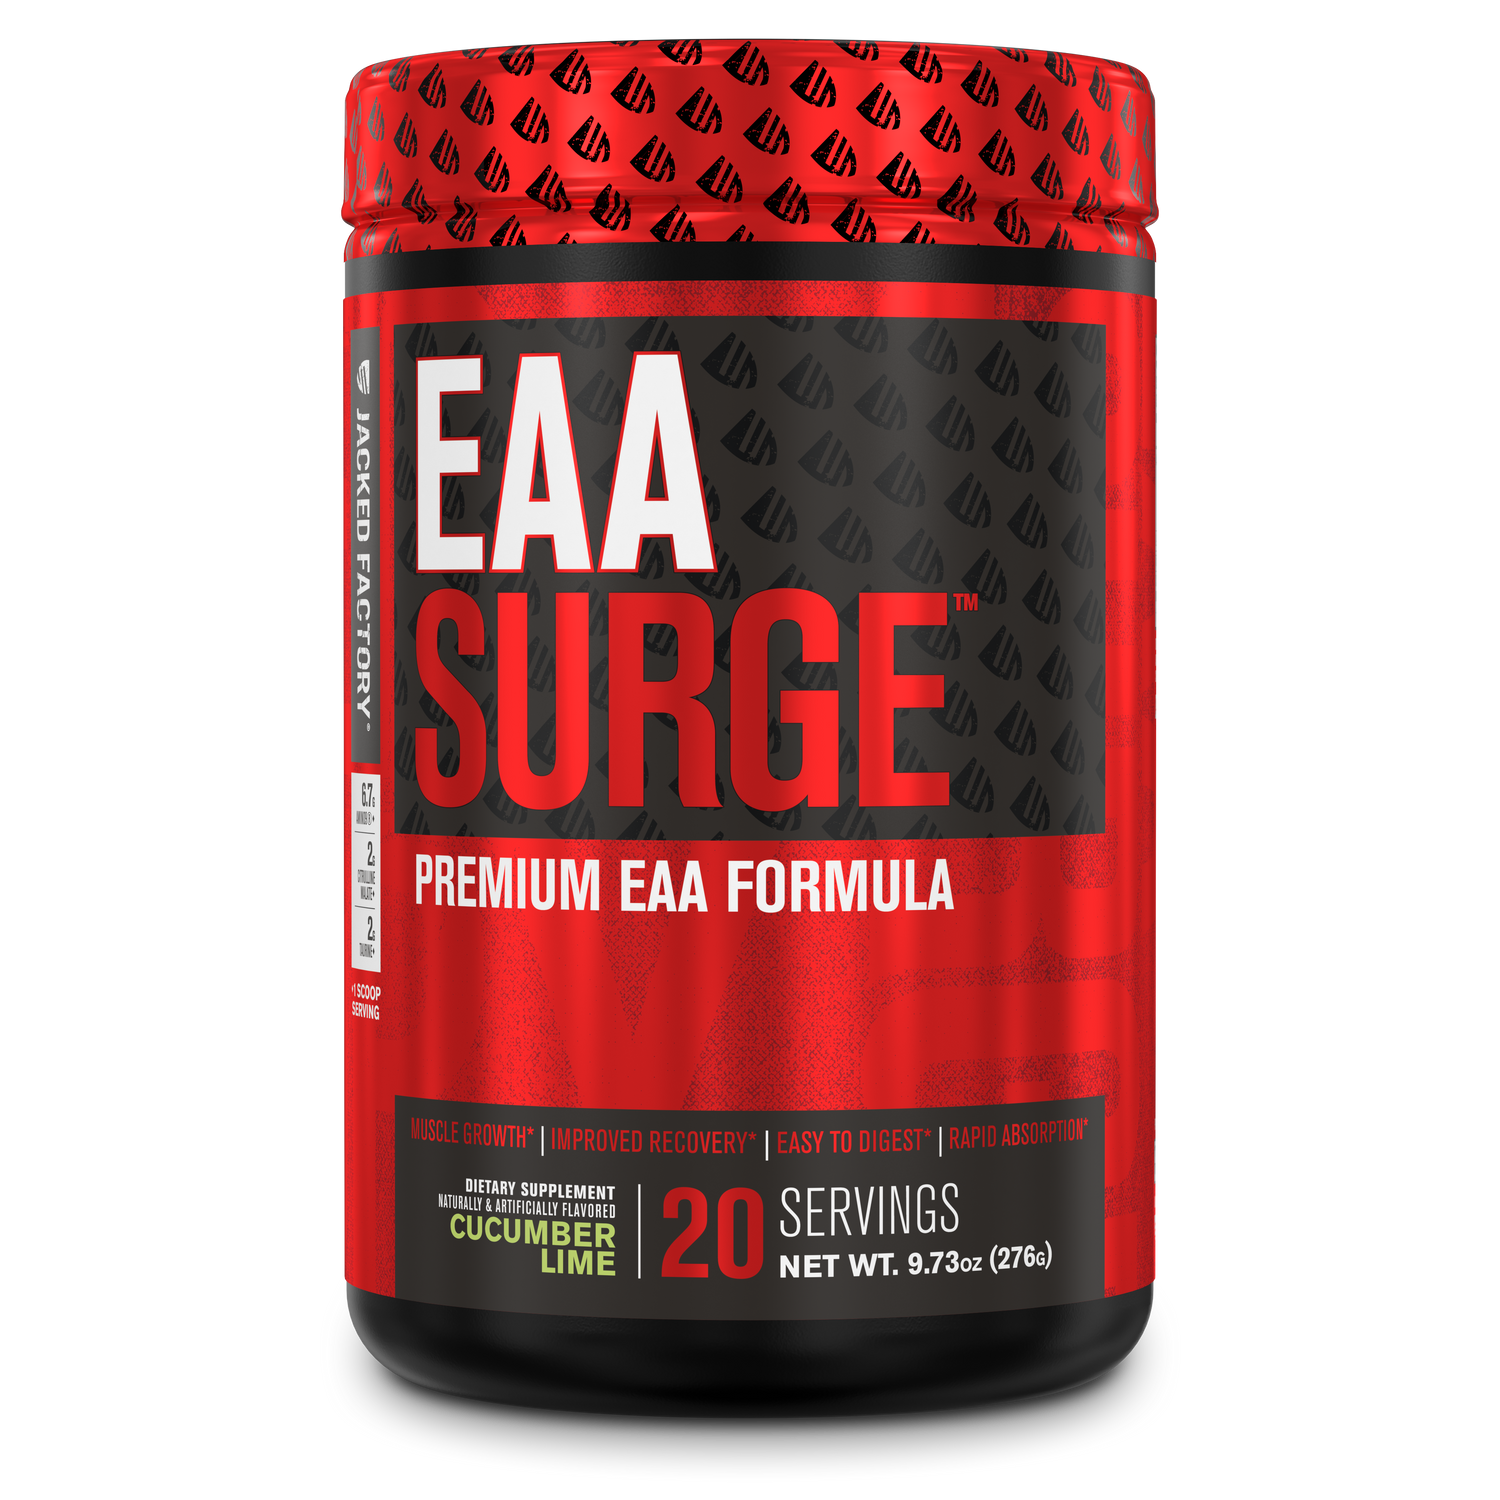 Jacked Factory's Cucumber Lime EAA Surge (20 servings) in a black bottle with red label